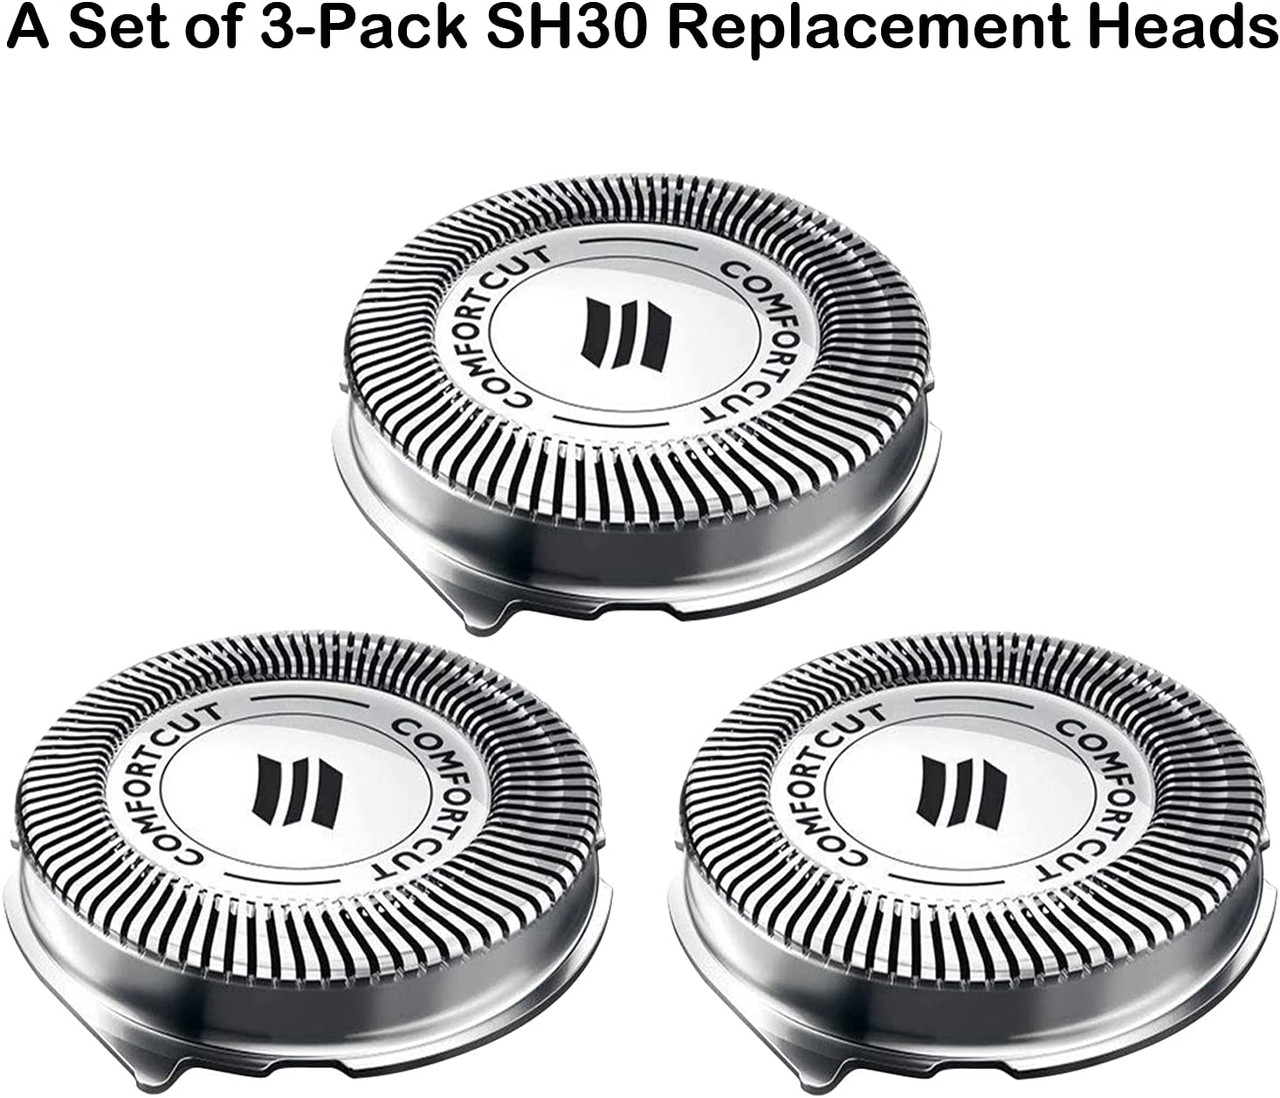 SH30 Replacement Heads for Philips Norelco Series 3000, 2000, 1000 Shavers  and S738 Click and Style, ComfortCut Shaving Heads 6 Pack